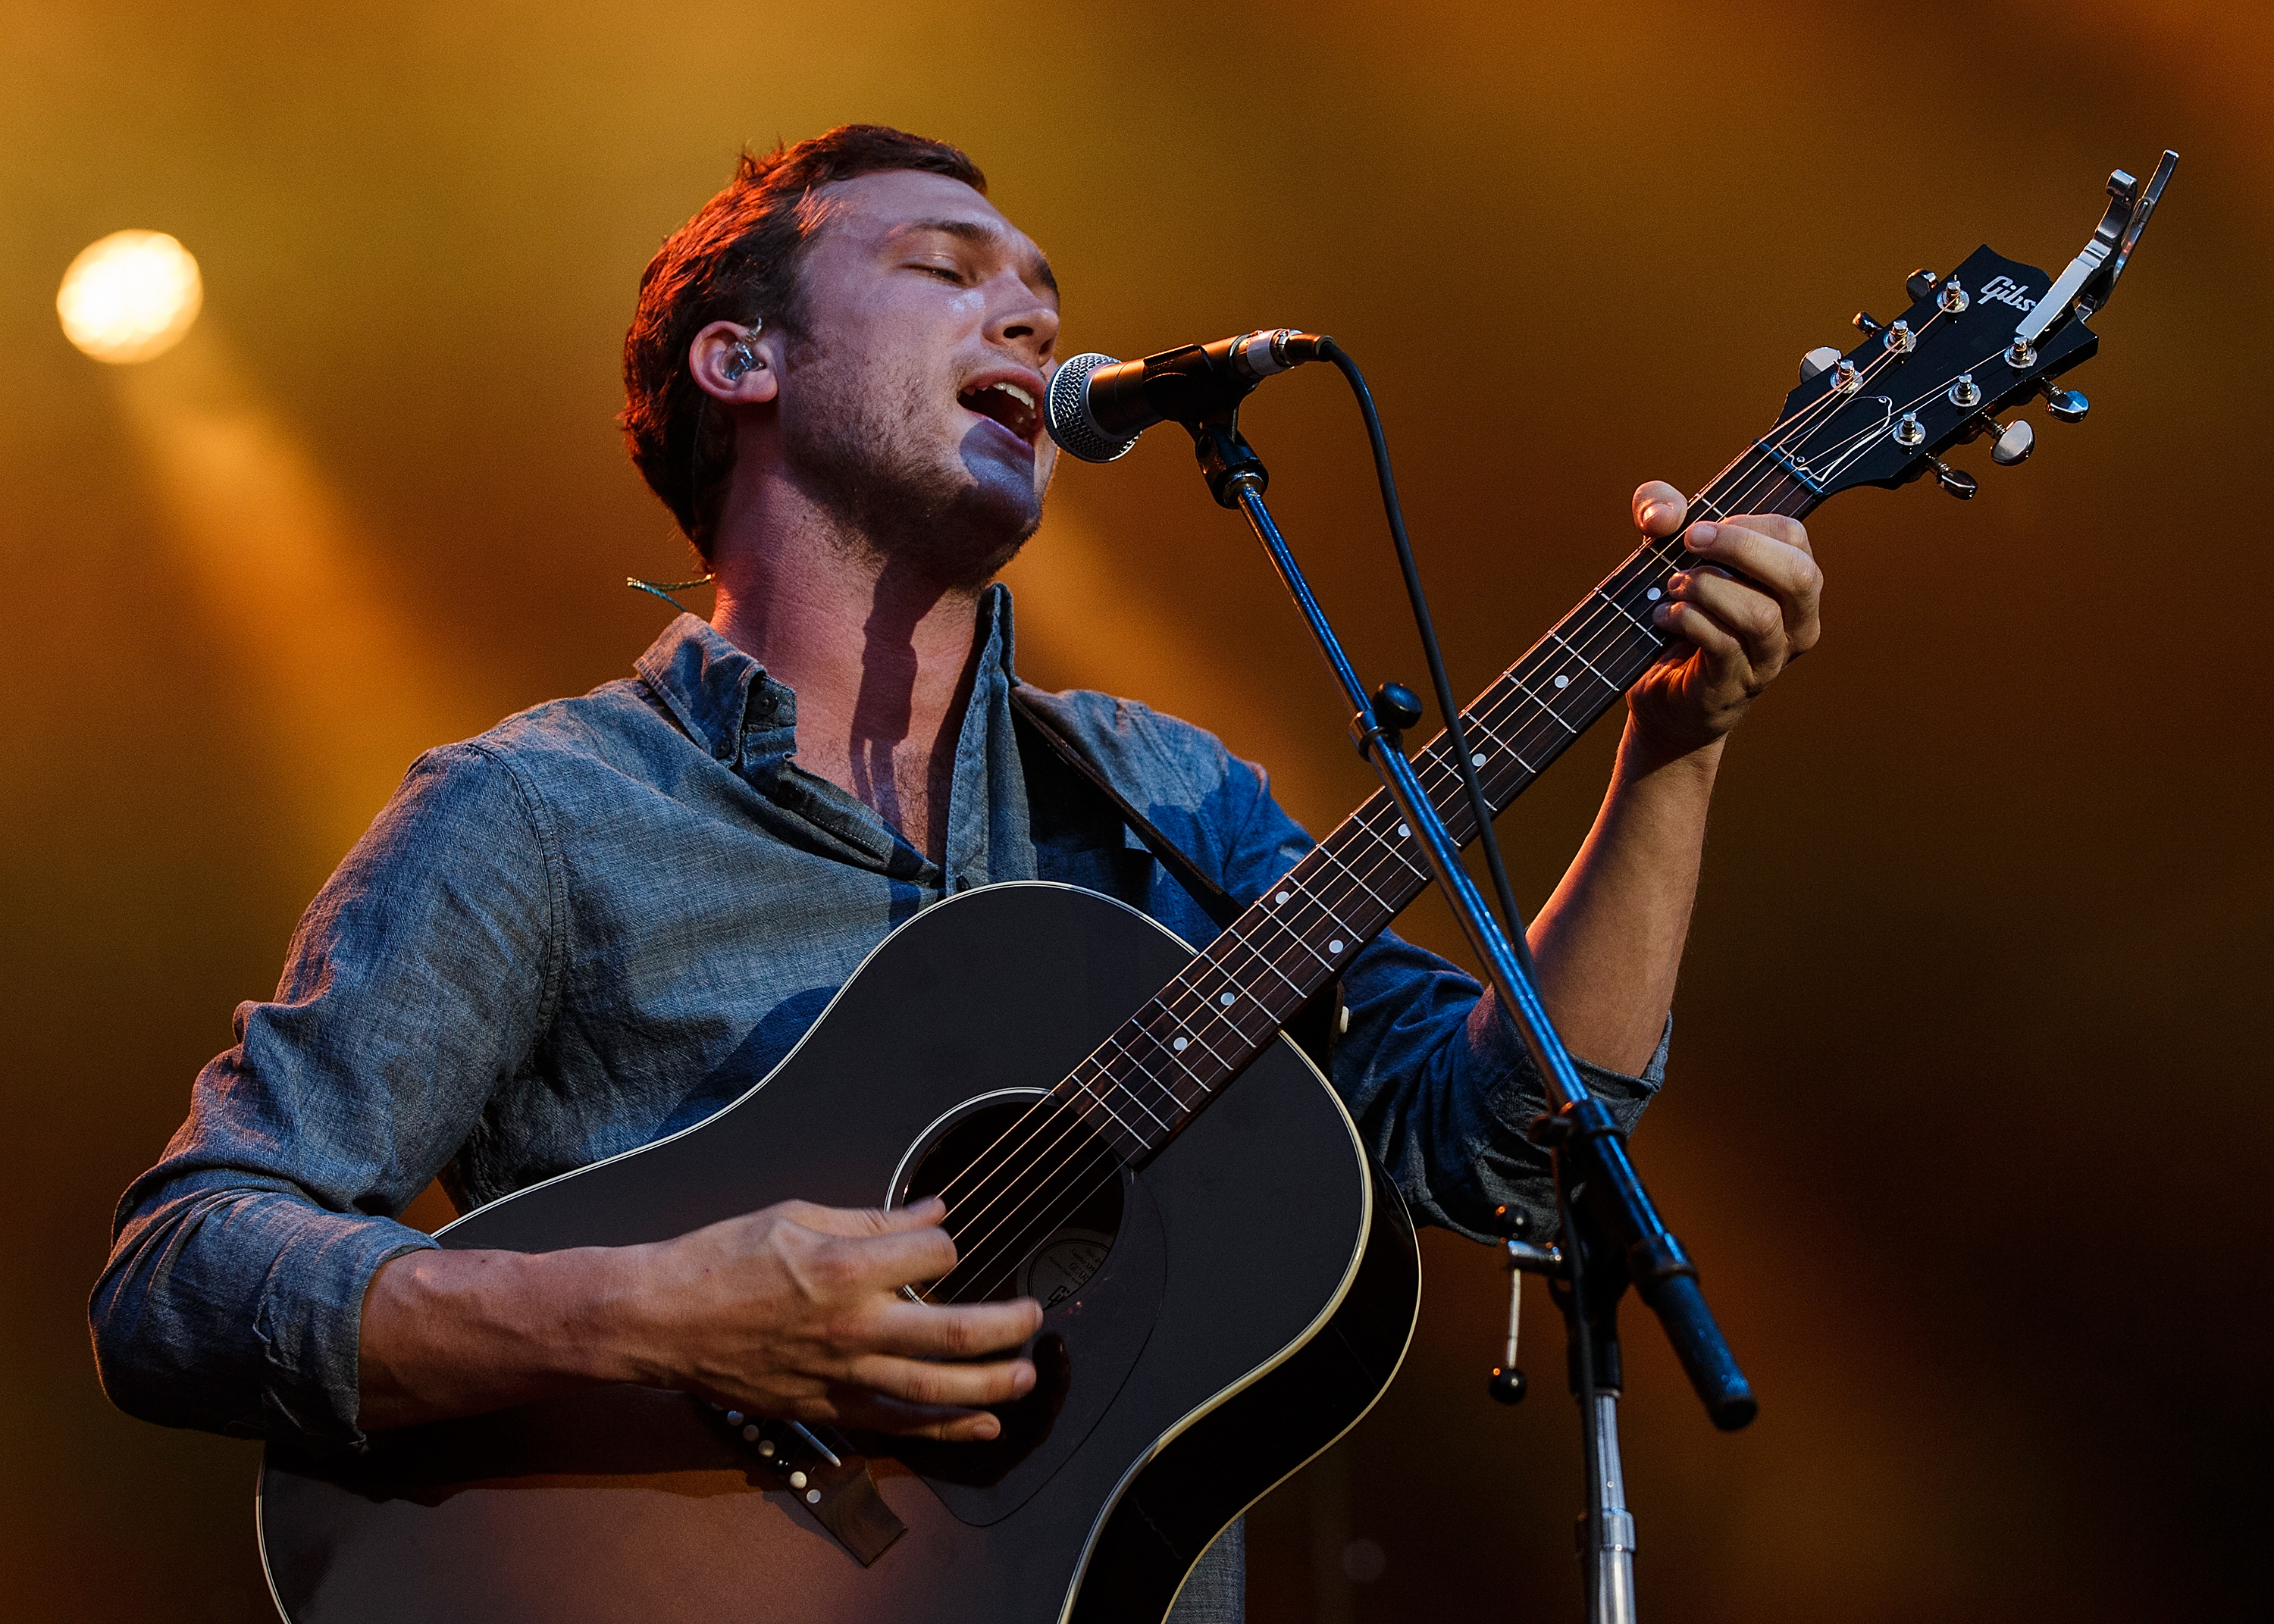 Phillip Phillips performs on stage at PNE Amphitheatre during Day 1 of The Fair At The PNE on August 16, 2014 in Vancouver, Canada. (Andrew Chin—Getty Images)